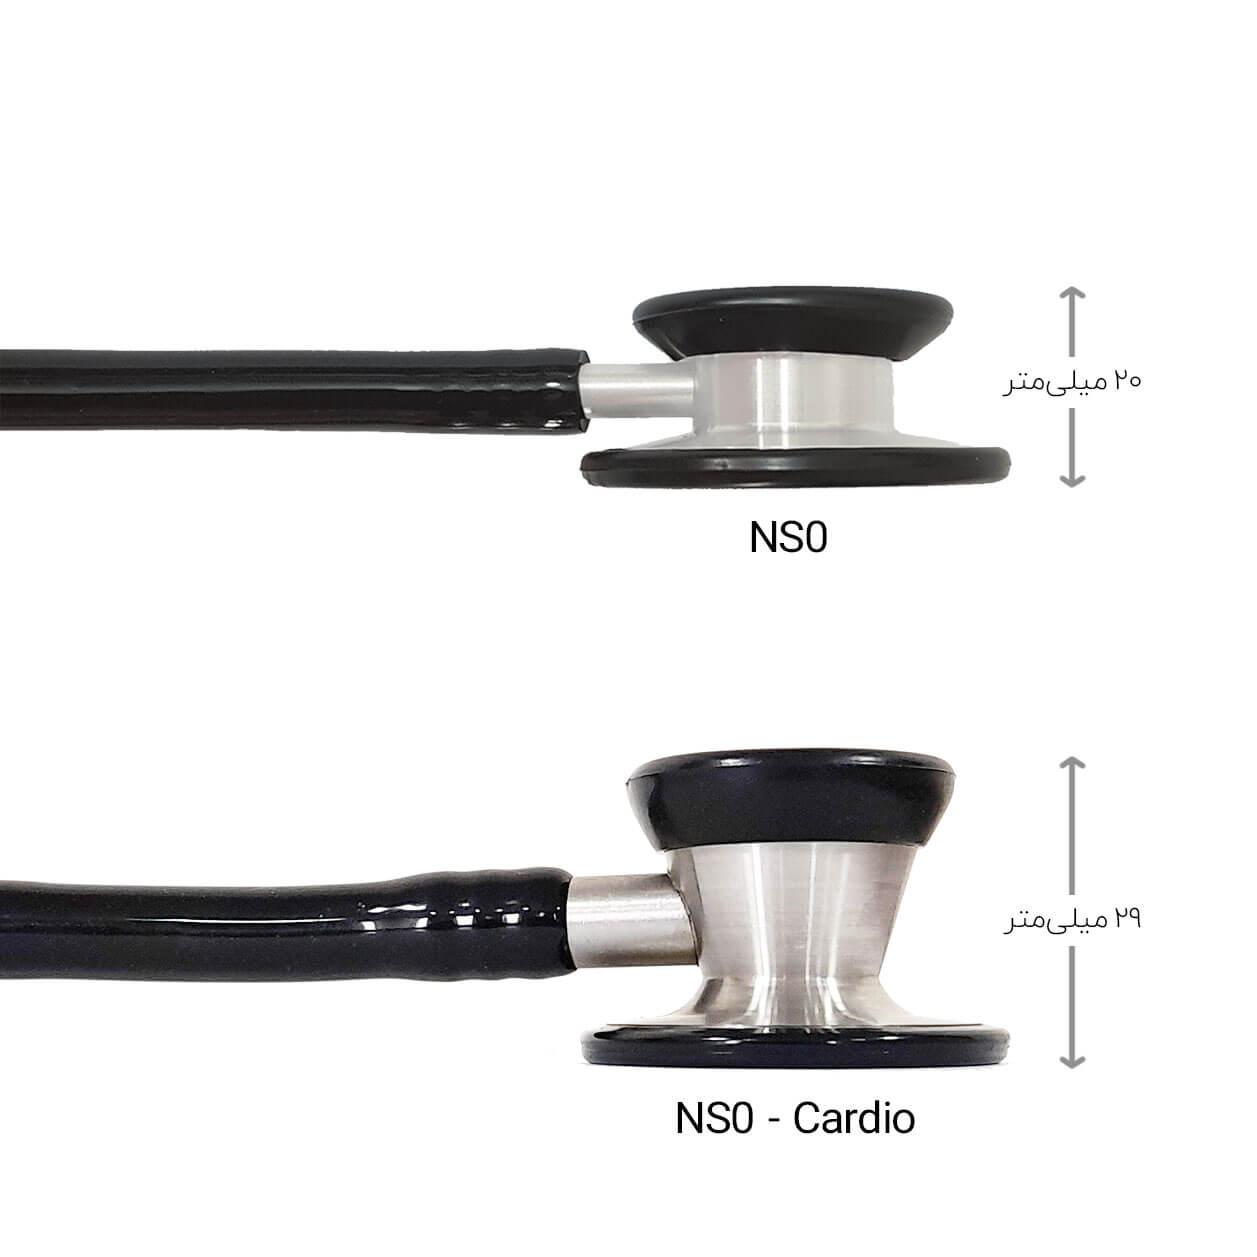 Comparison of NS0 and NS0-Cardio Medical Stethoscopes